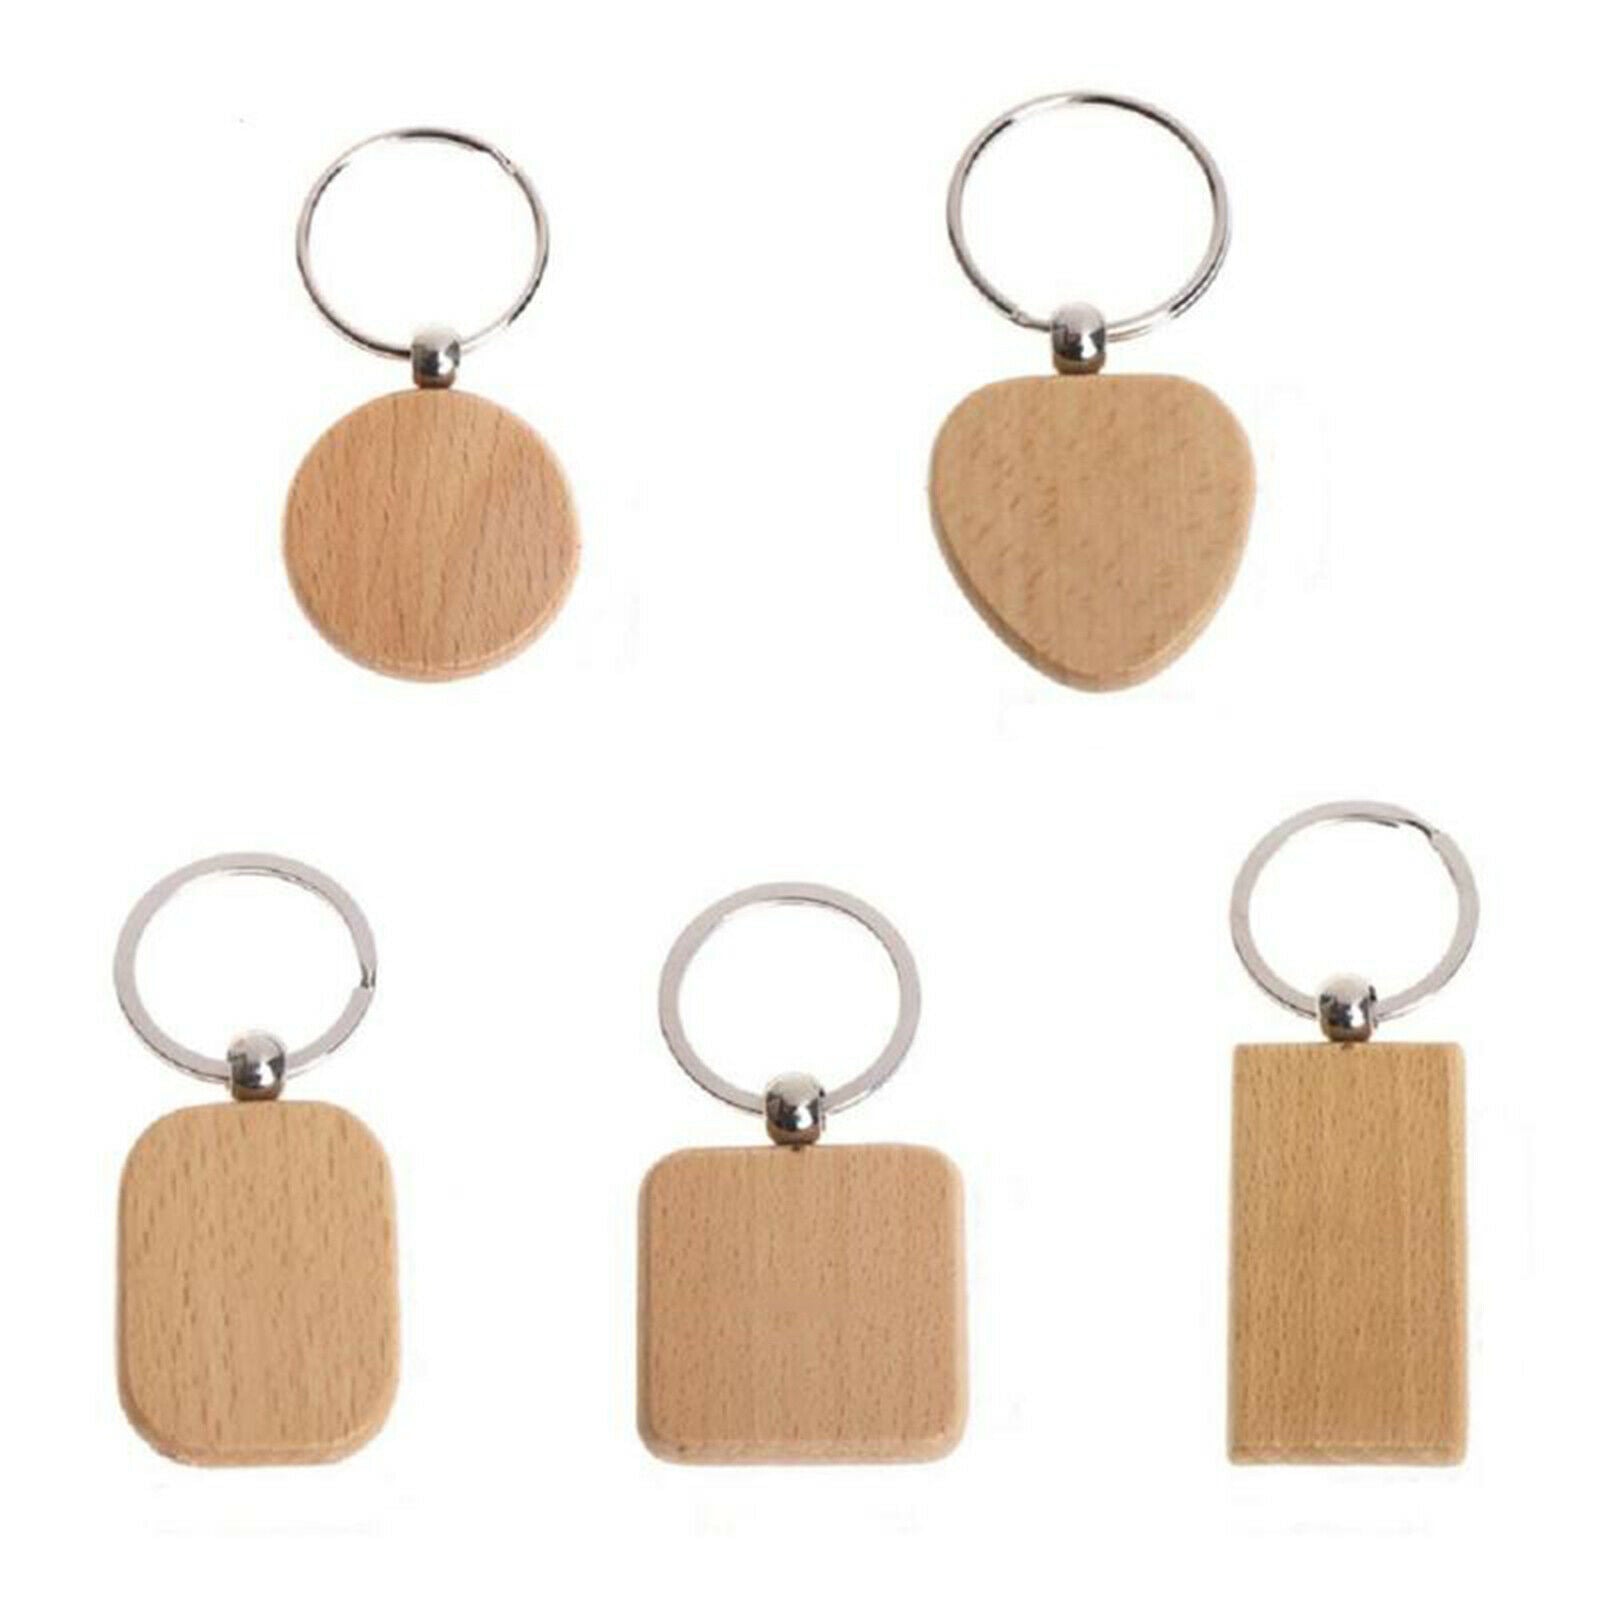 25x Blank Wooden Keychain Ring Key Tags for Car Key Rings Hanging Pendants